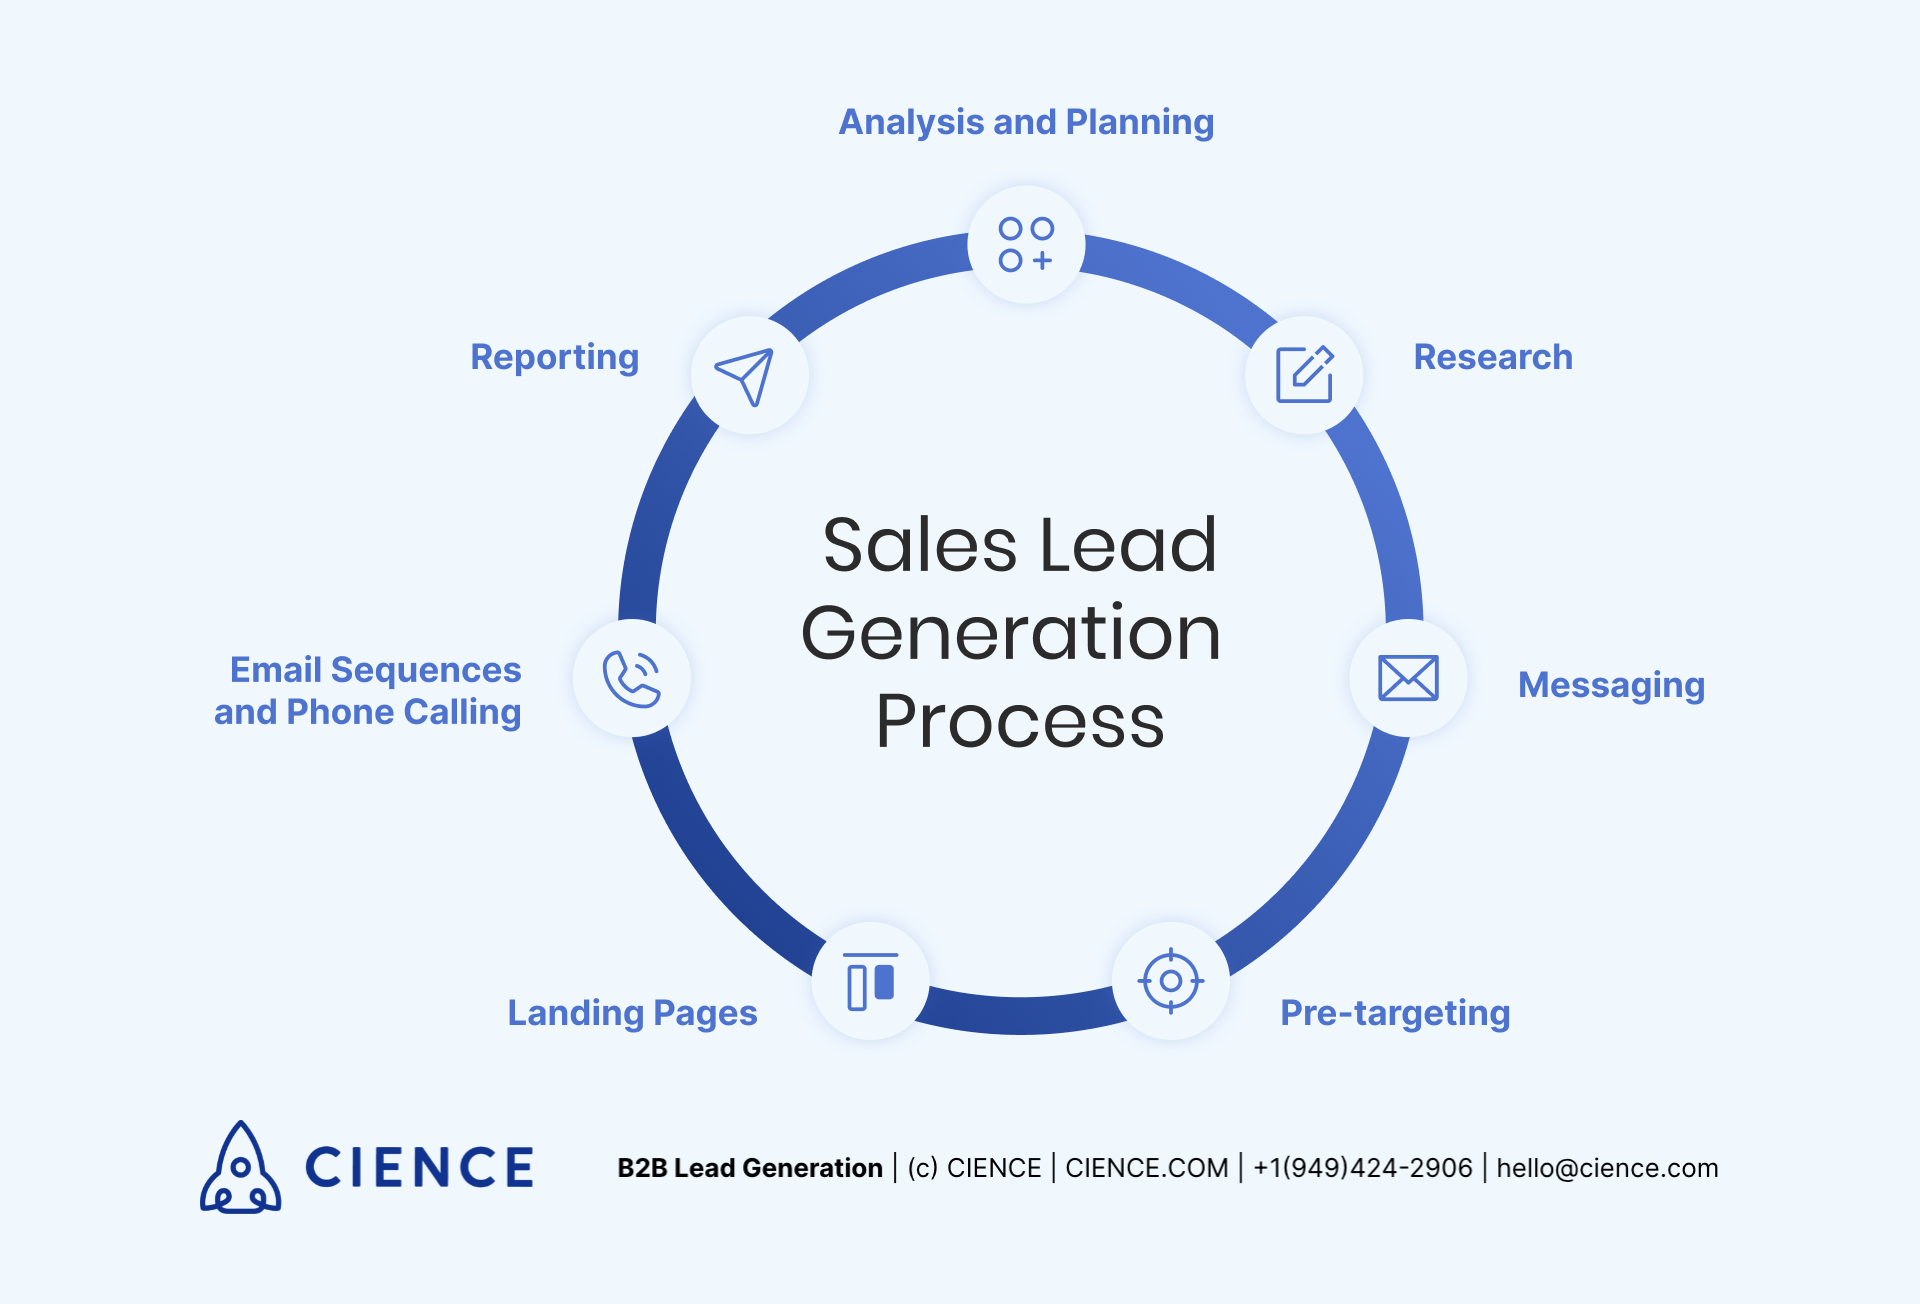 Sales Lead Generation Process Stages